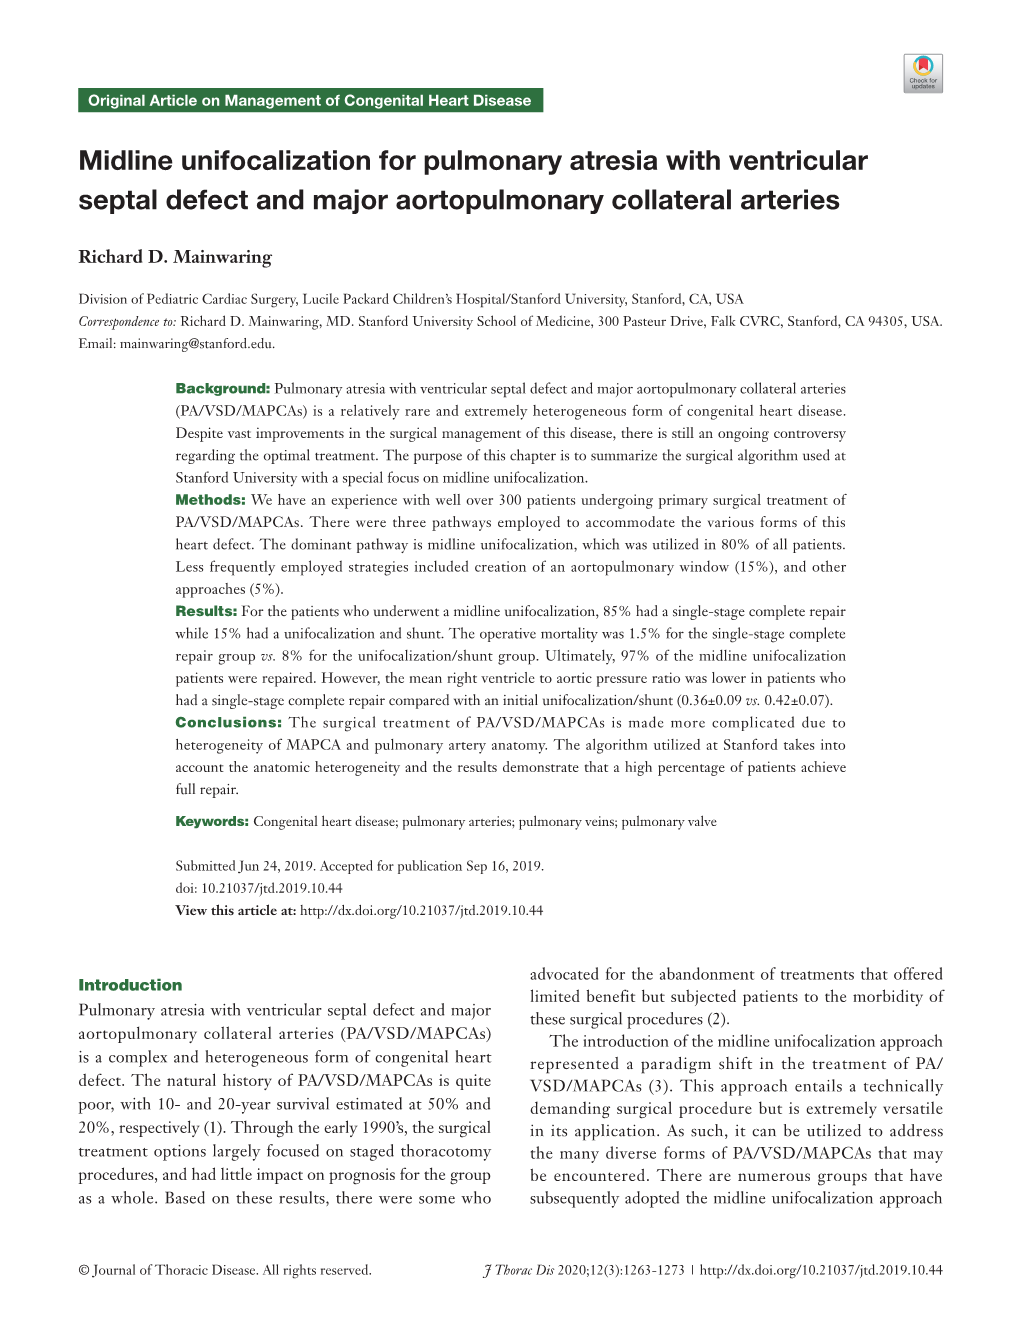 Midline Unifocalization for Pulmonary Atresia with Ventricular Septal Defect and Major Aortopulmonary Collateral Arteries